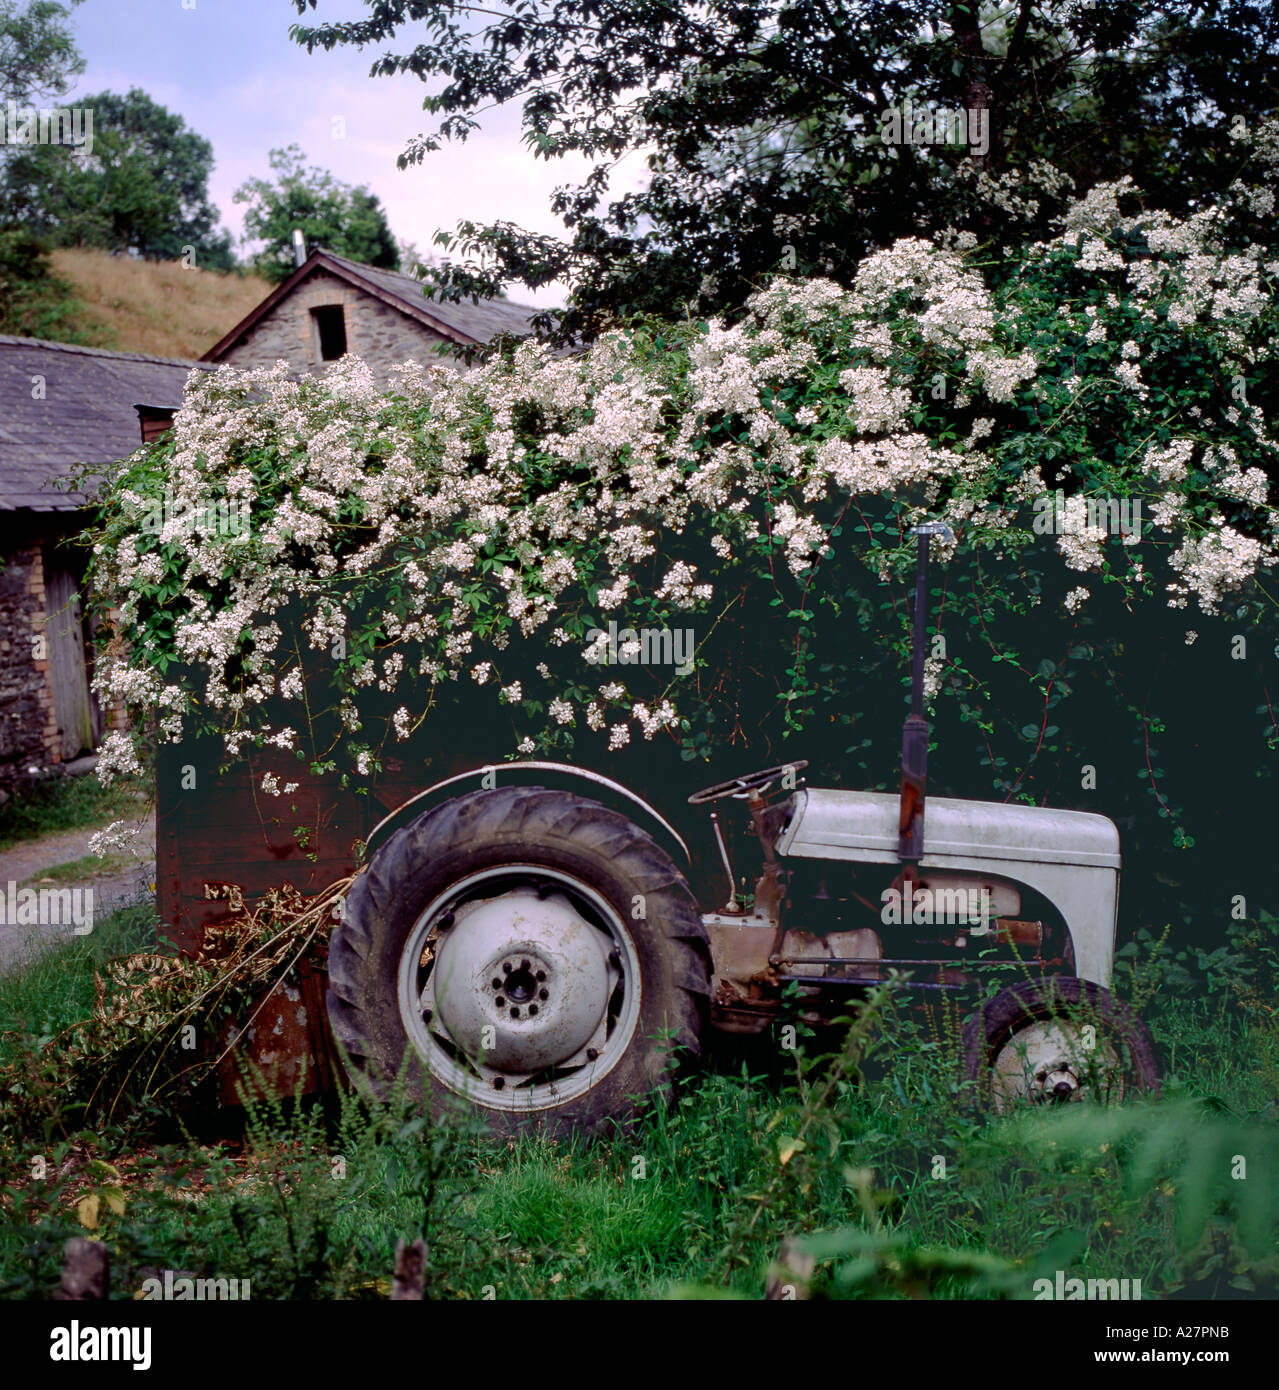 Rose filipes Kiftsgate roses rambling over a railway carriage shed next to an old Massey Ferguson tractor in Carmarthenshire Wales UK   KATHY DEWITT Stock Photo